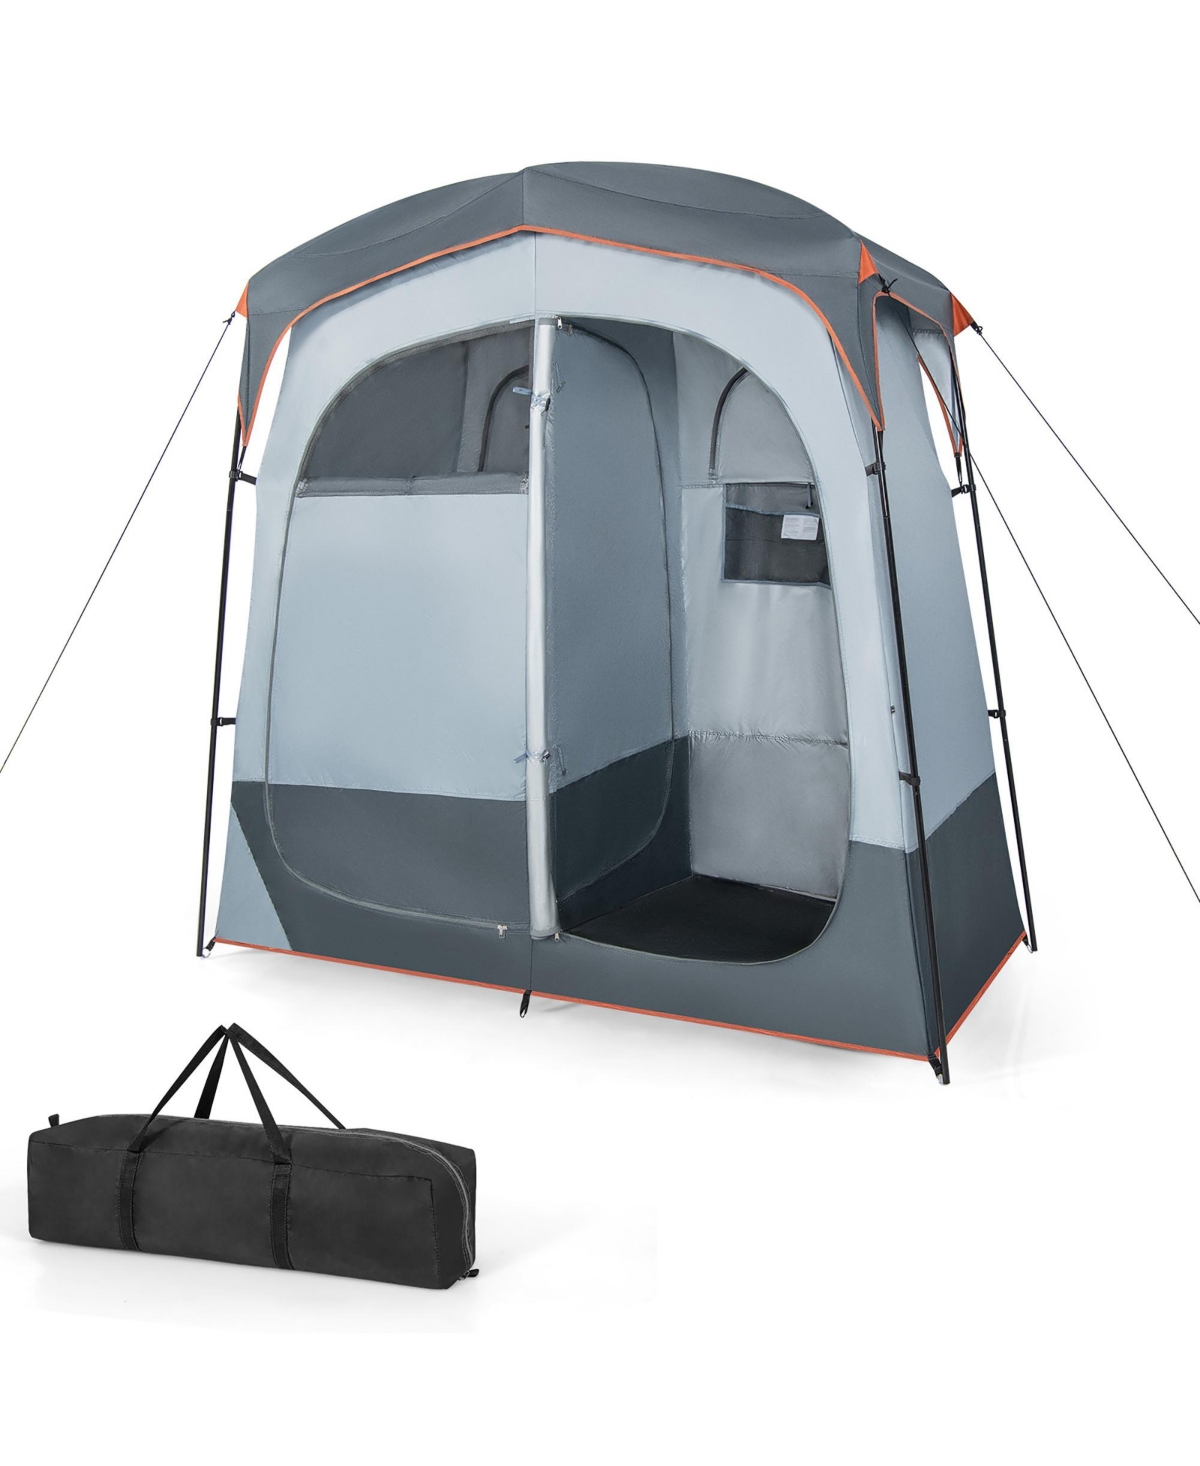 2 Room Shower Tent Oversize Privacy Shelter Portable Dressing Toilet Outdoor - Grey